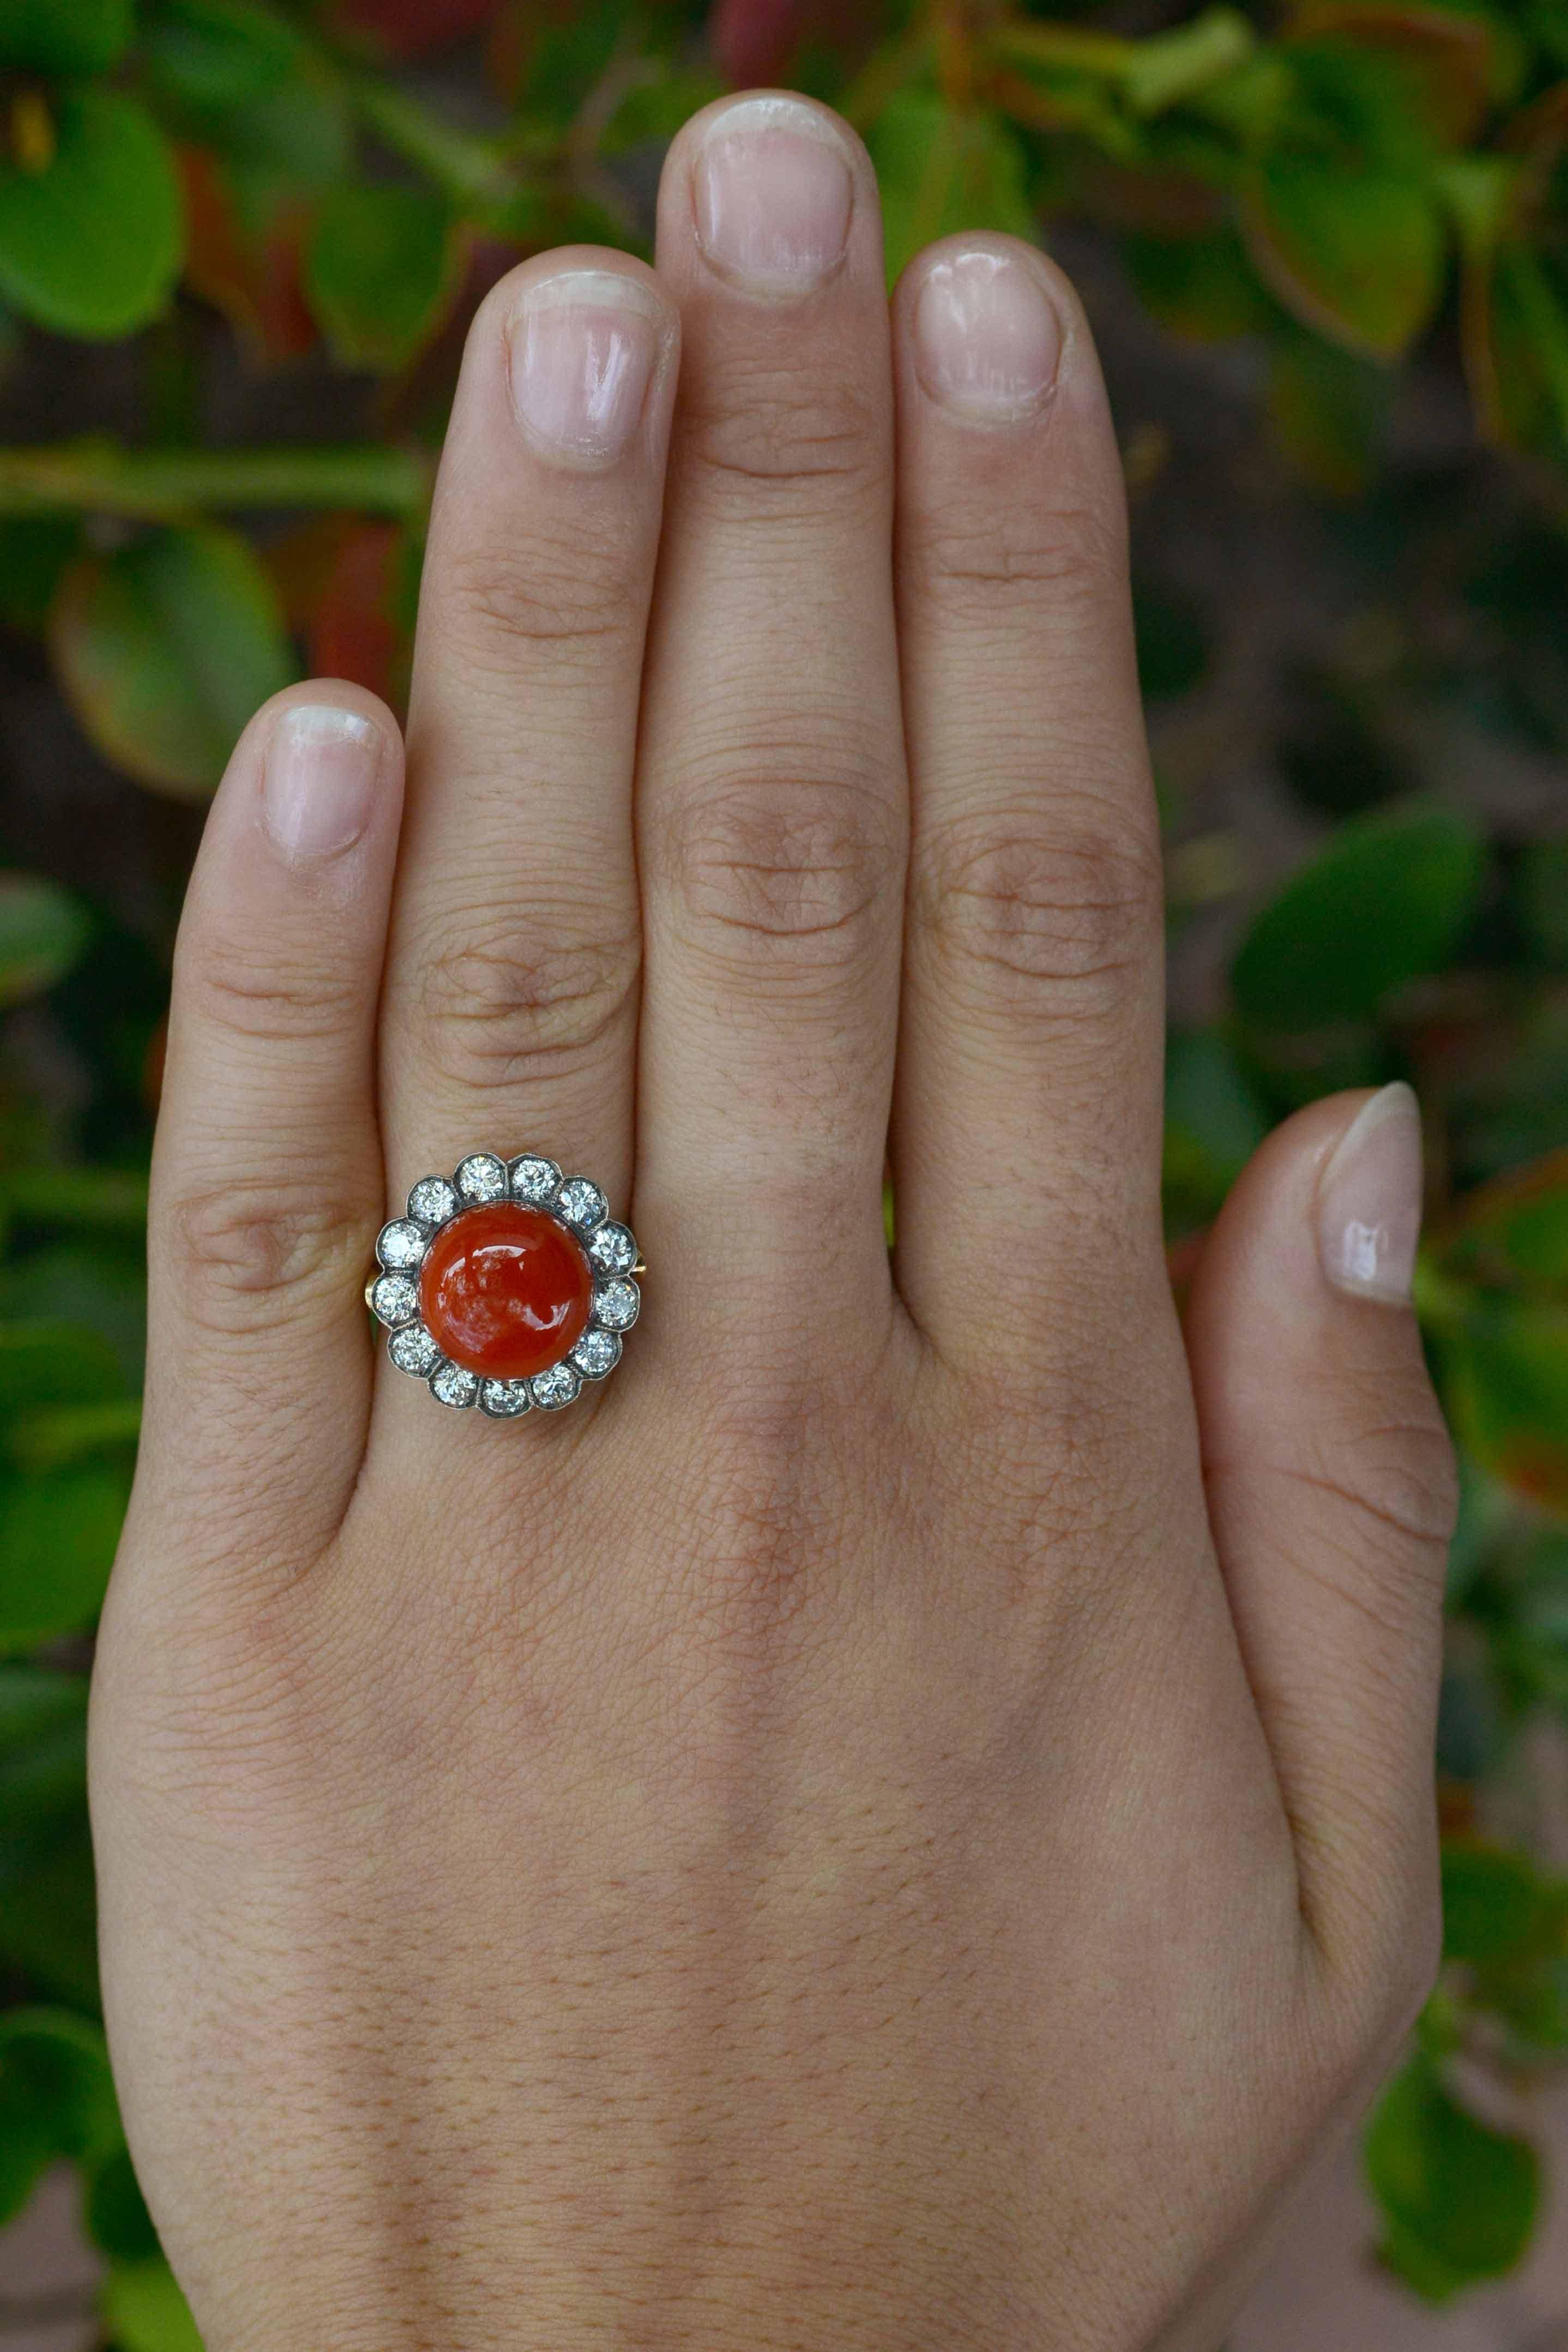 A fabulous find from the late 1800s-early 1900s Victorian era, this ox blood coral cocktail ring possesses a most vivid and captivating rare color. Set as a dome or cluster, the halo set with 1 carat of shimmering, fiery, old mine cut diamonds